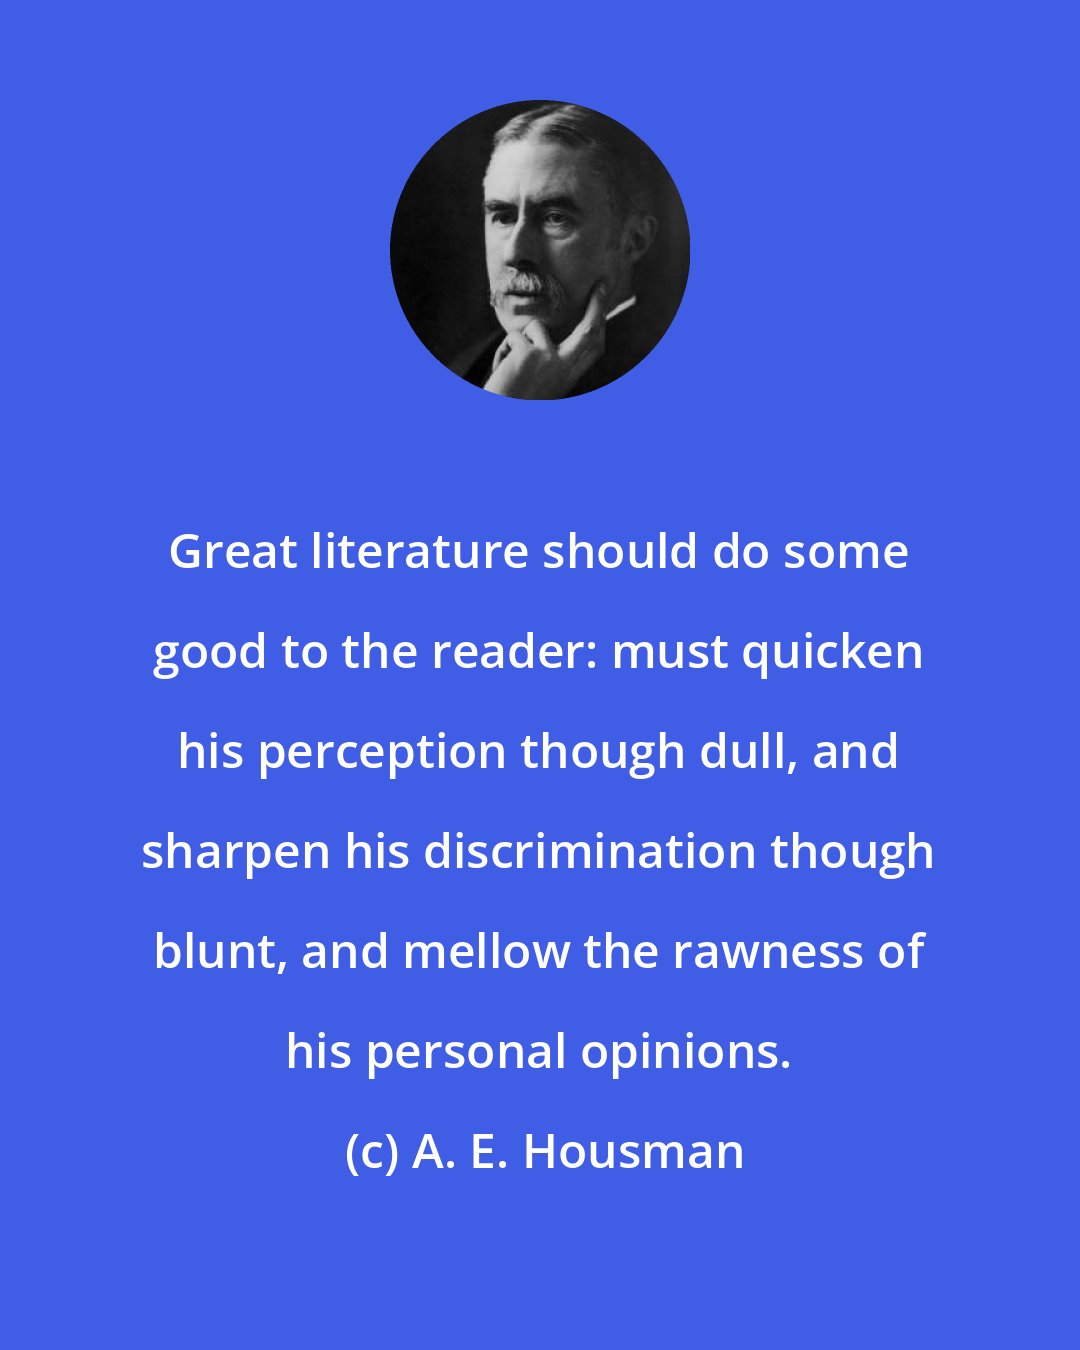 A. E. Housman: Great literature should do some good to the reader: must quicken his perception though dull, and sharpen his discrimination though blunt, and mellow the rawness of his personal opinions.